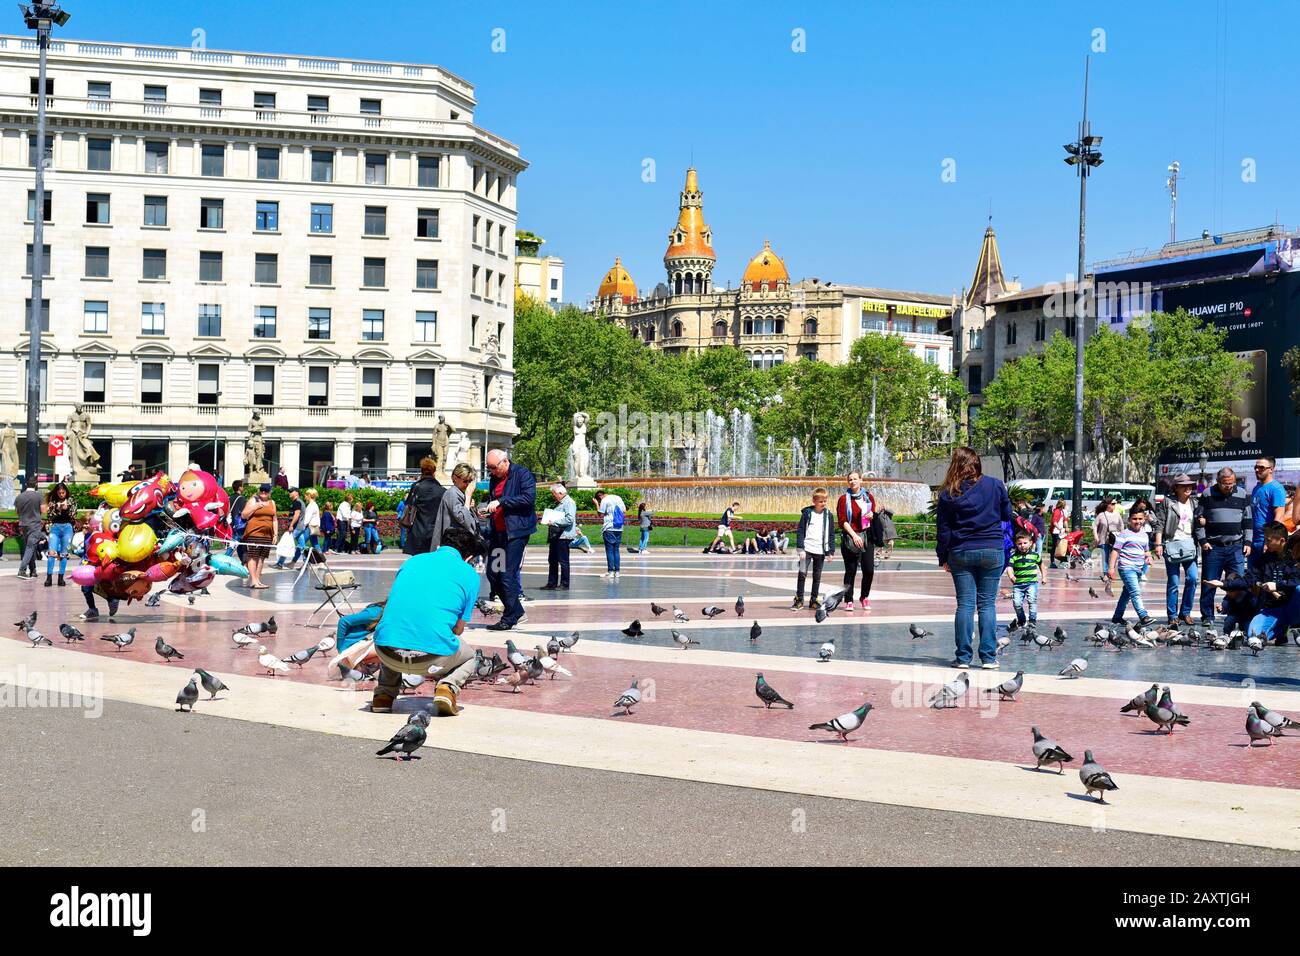 BARCELONA, SPAIN - APRIL 7, 2017: The ambiance in Placa Catalunya in Barcelona, Spain, the square which is considered to be the city center, where som Stock Photo